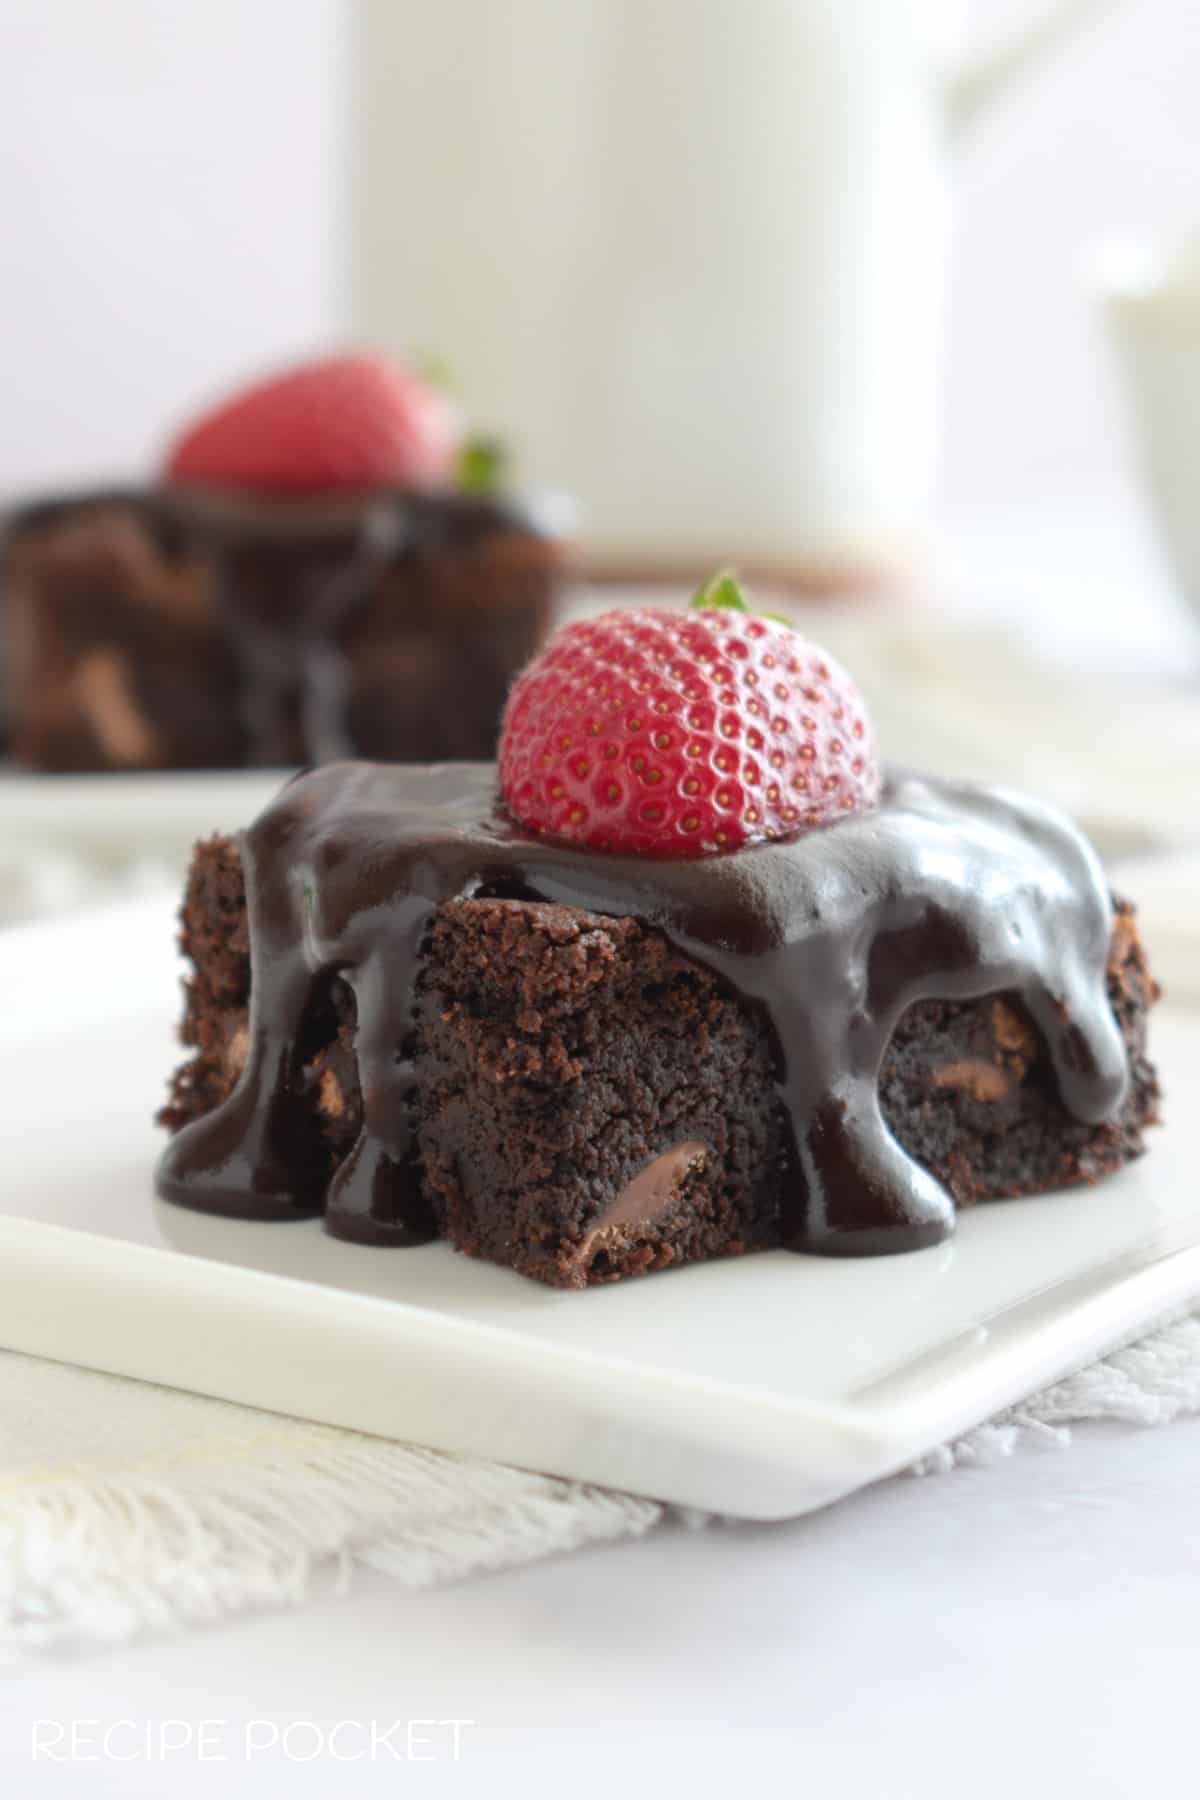 Brownies with a cake mix with a chocolate glaze and a strawberry on top.